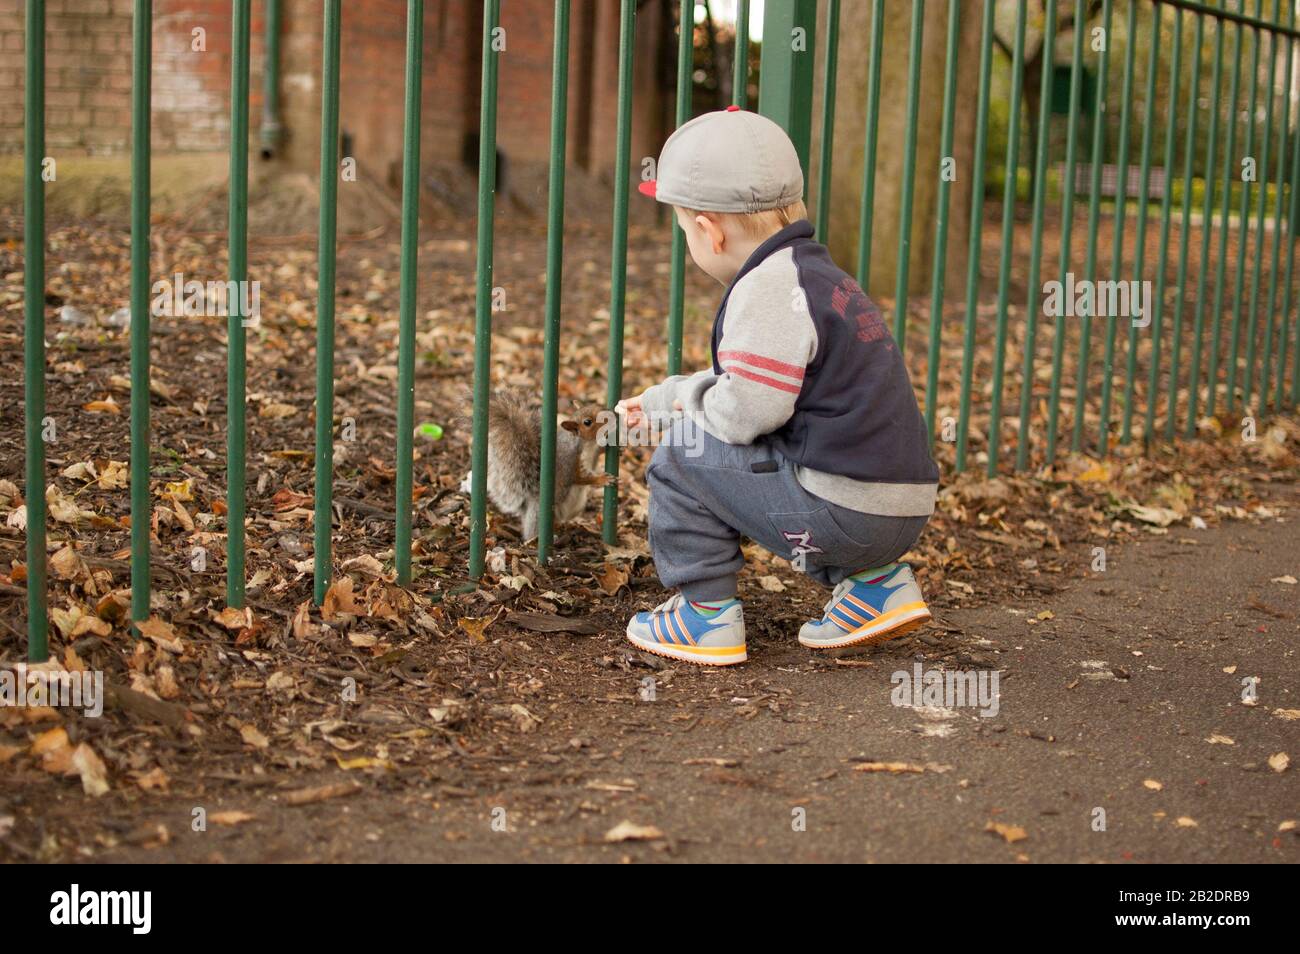 Child feeding a squirrel in local park through the fence Stock Photo